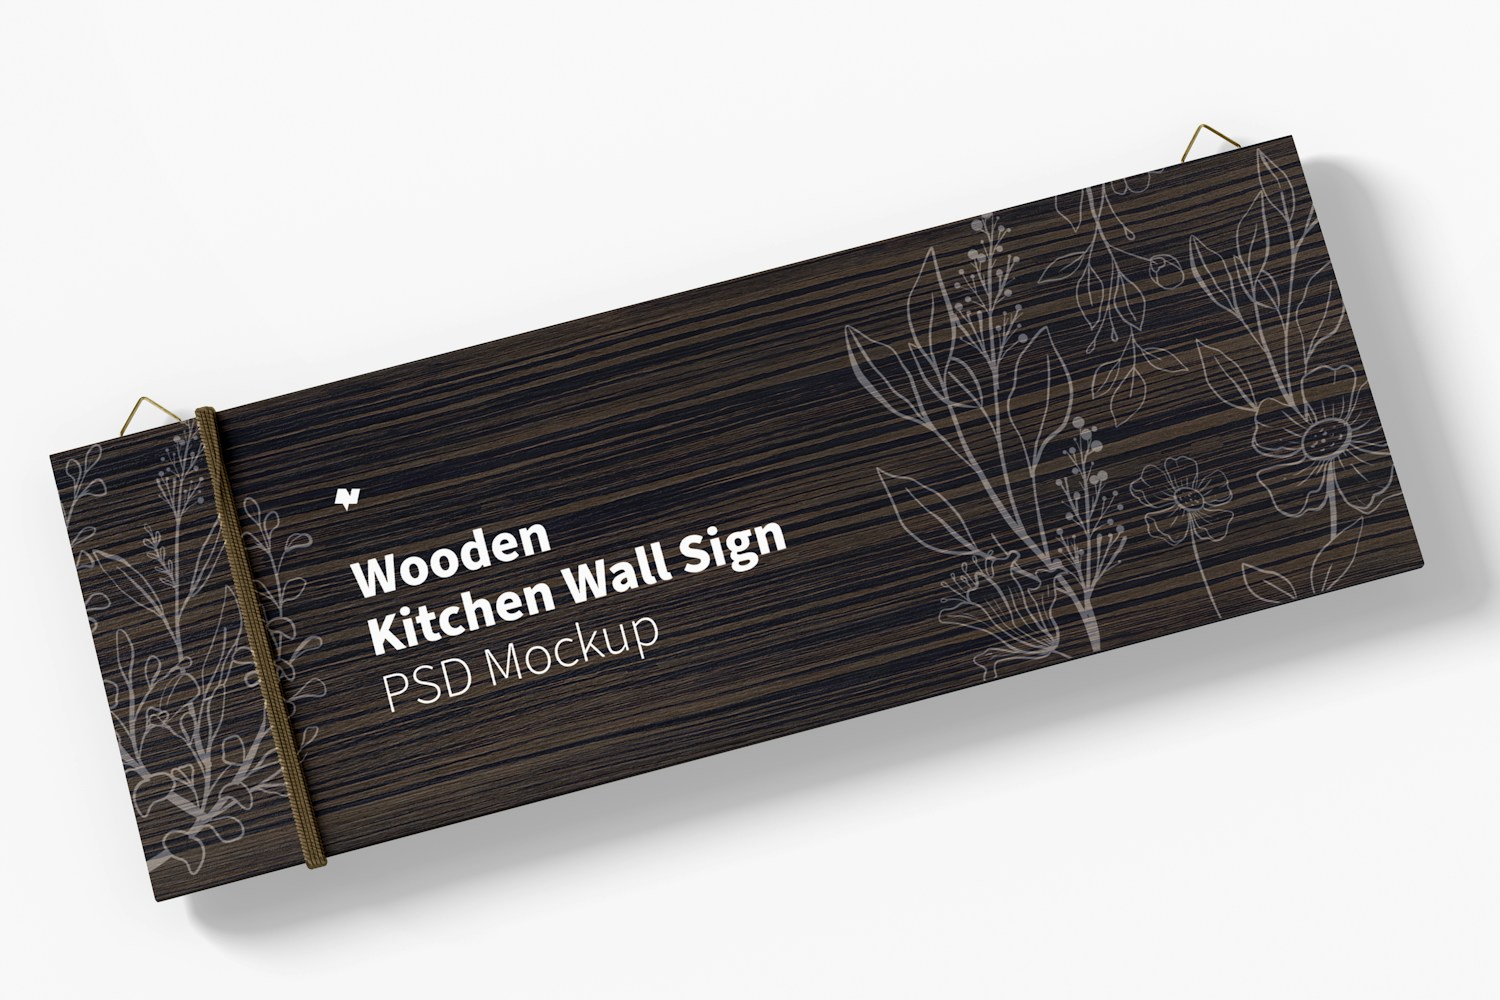 Wooden Kitchen Wall Sign Mockup, Top View